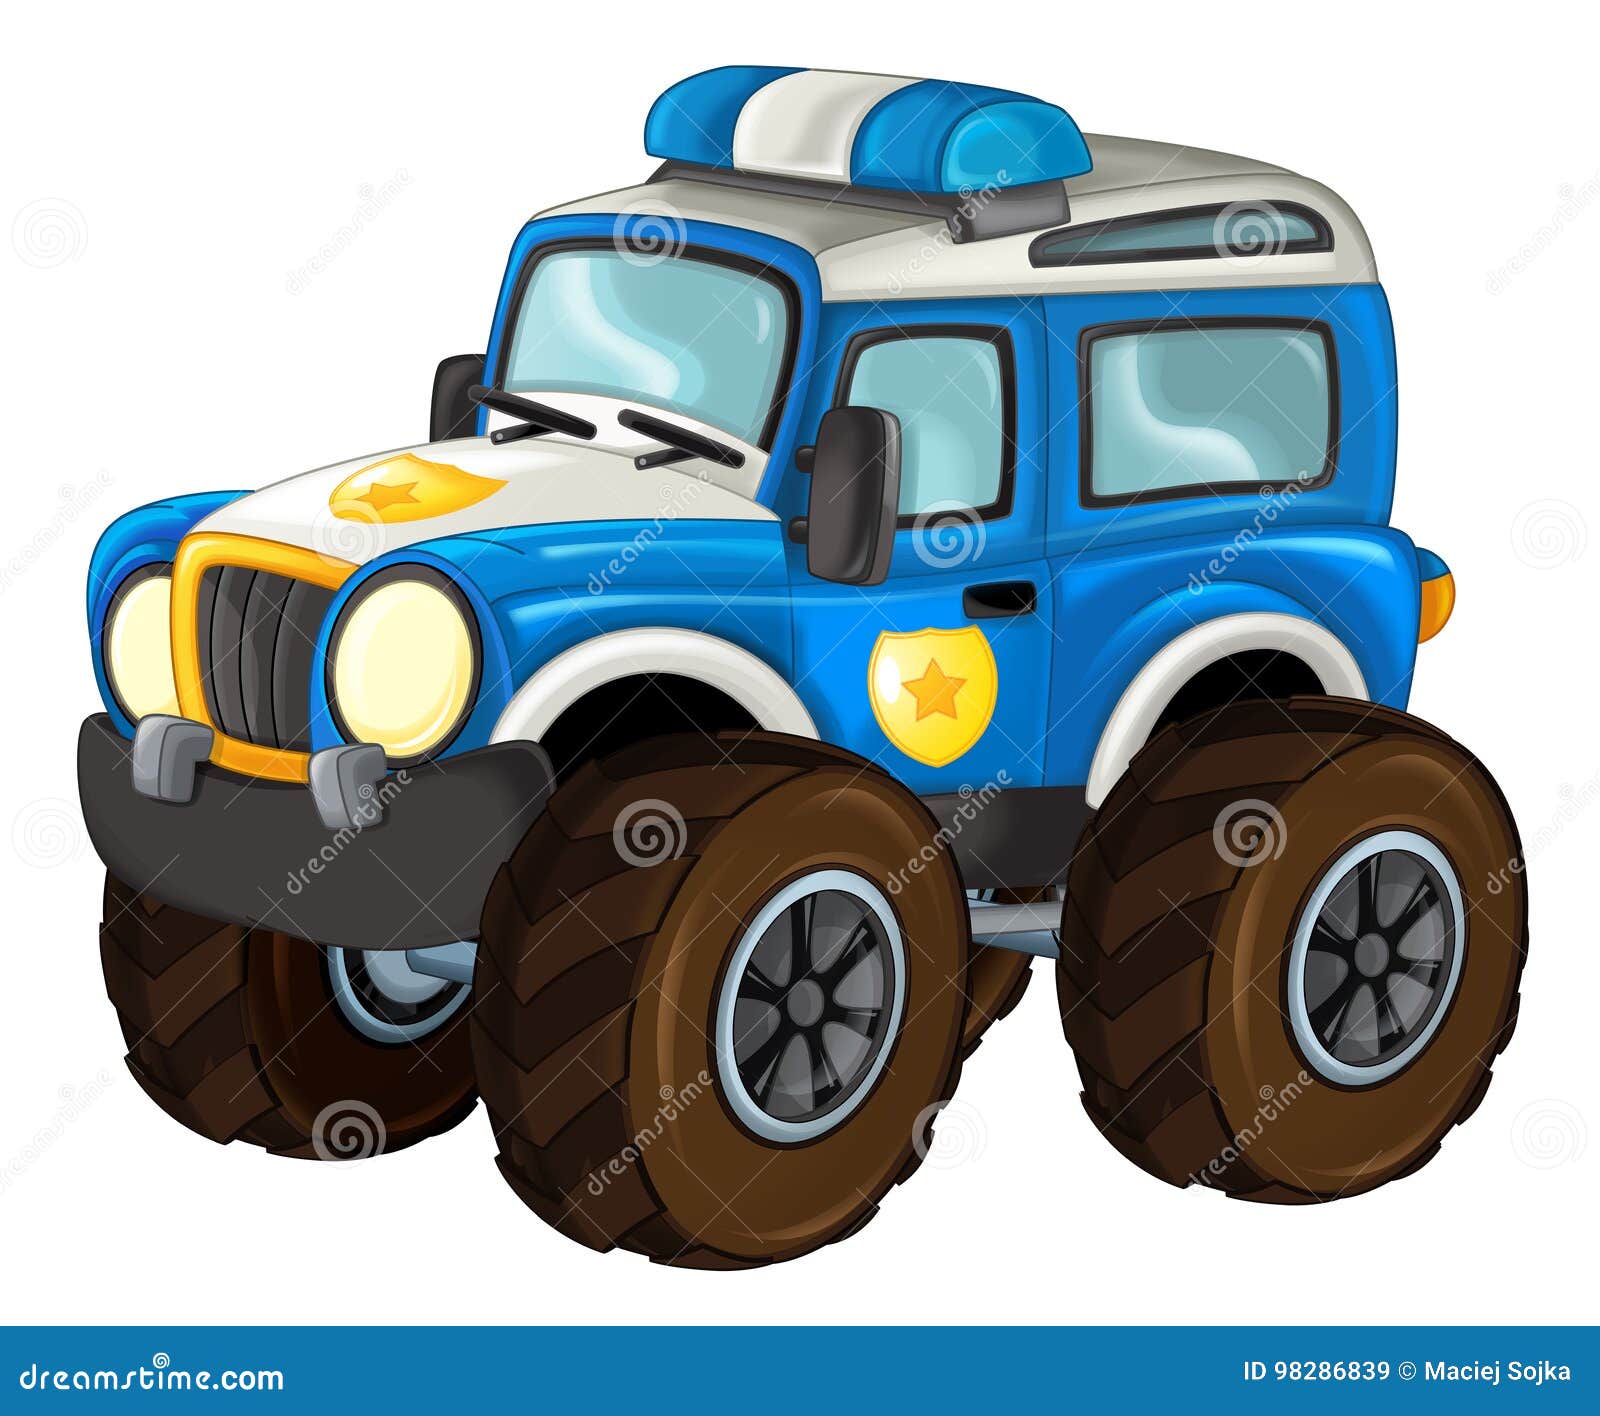 Cartoon Happy and Funny Off Road Police Car Looking Like Monster Truck /  Vehicle Stock Illustration - Illustration of monster, clipart: 98286839